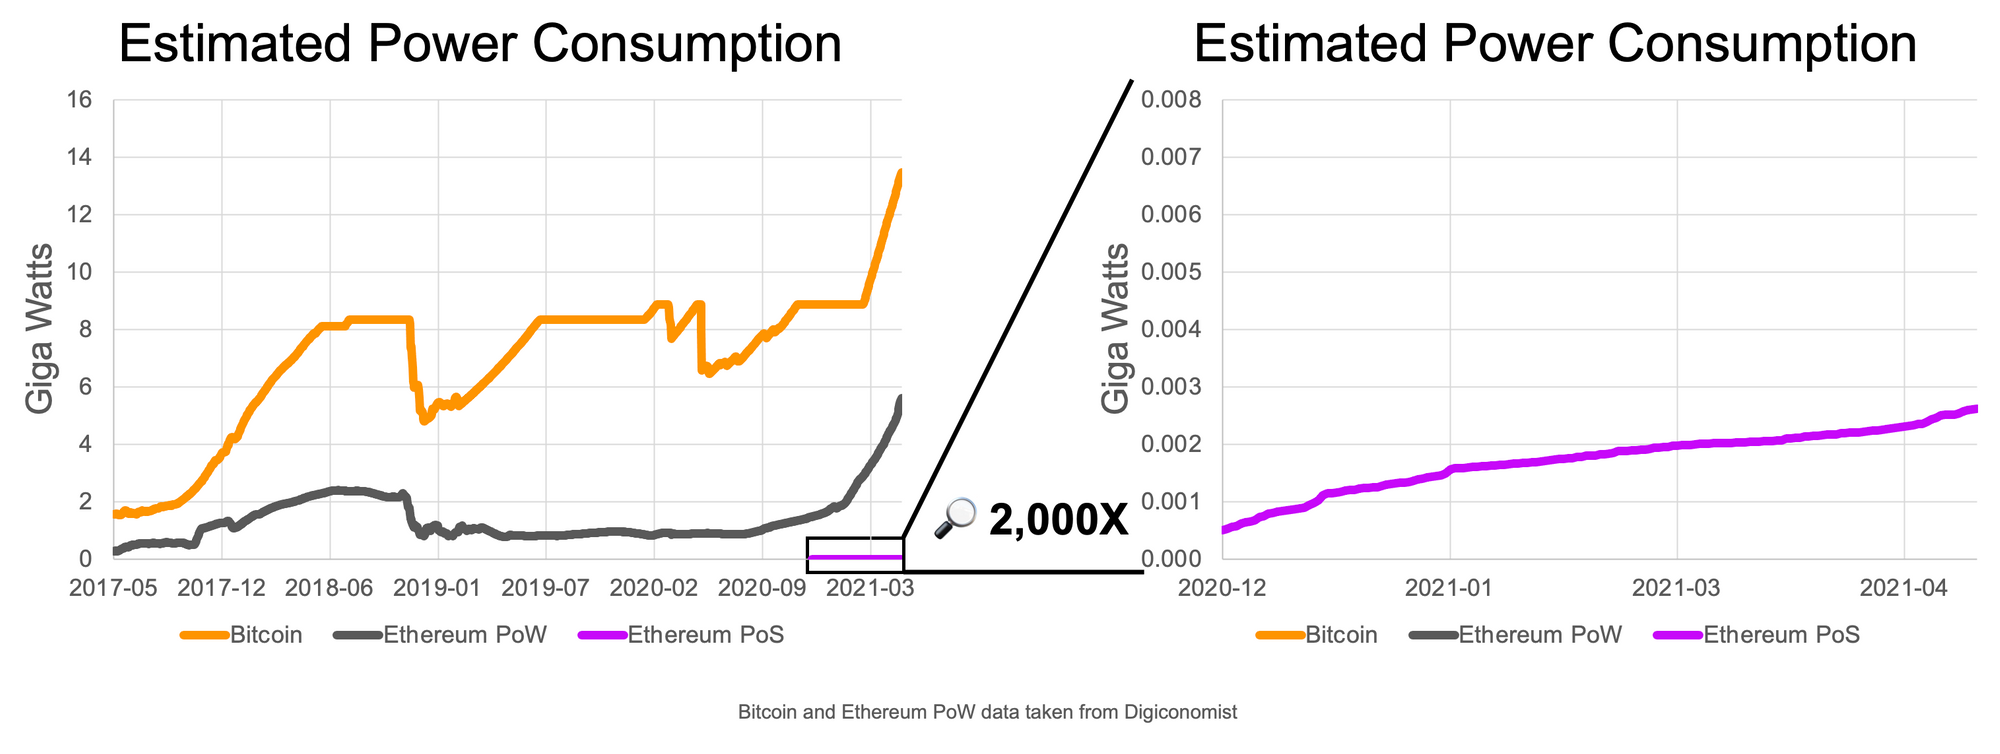 A graph comparing the energy consumption of Bitcoin, ETH proof of work, and ETH proof of stake